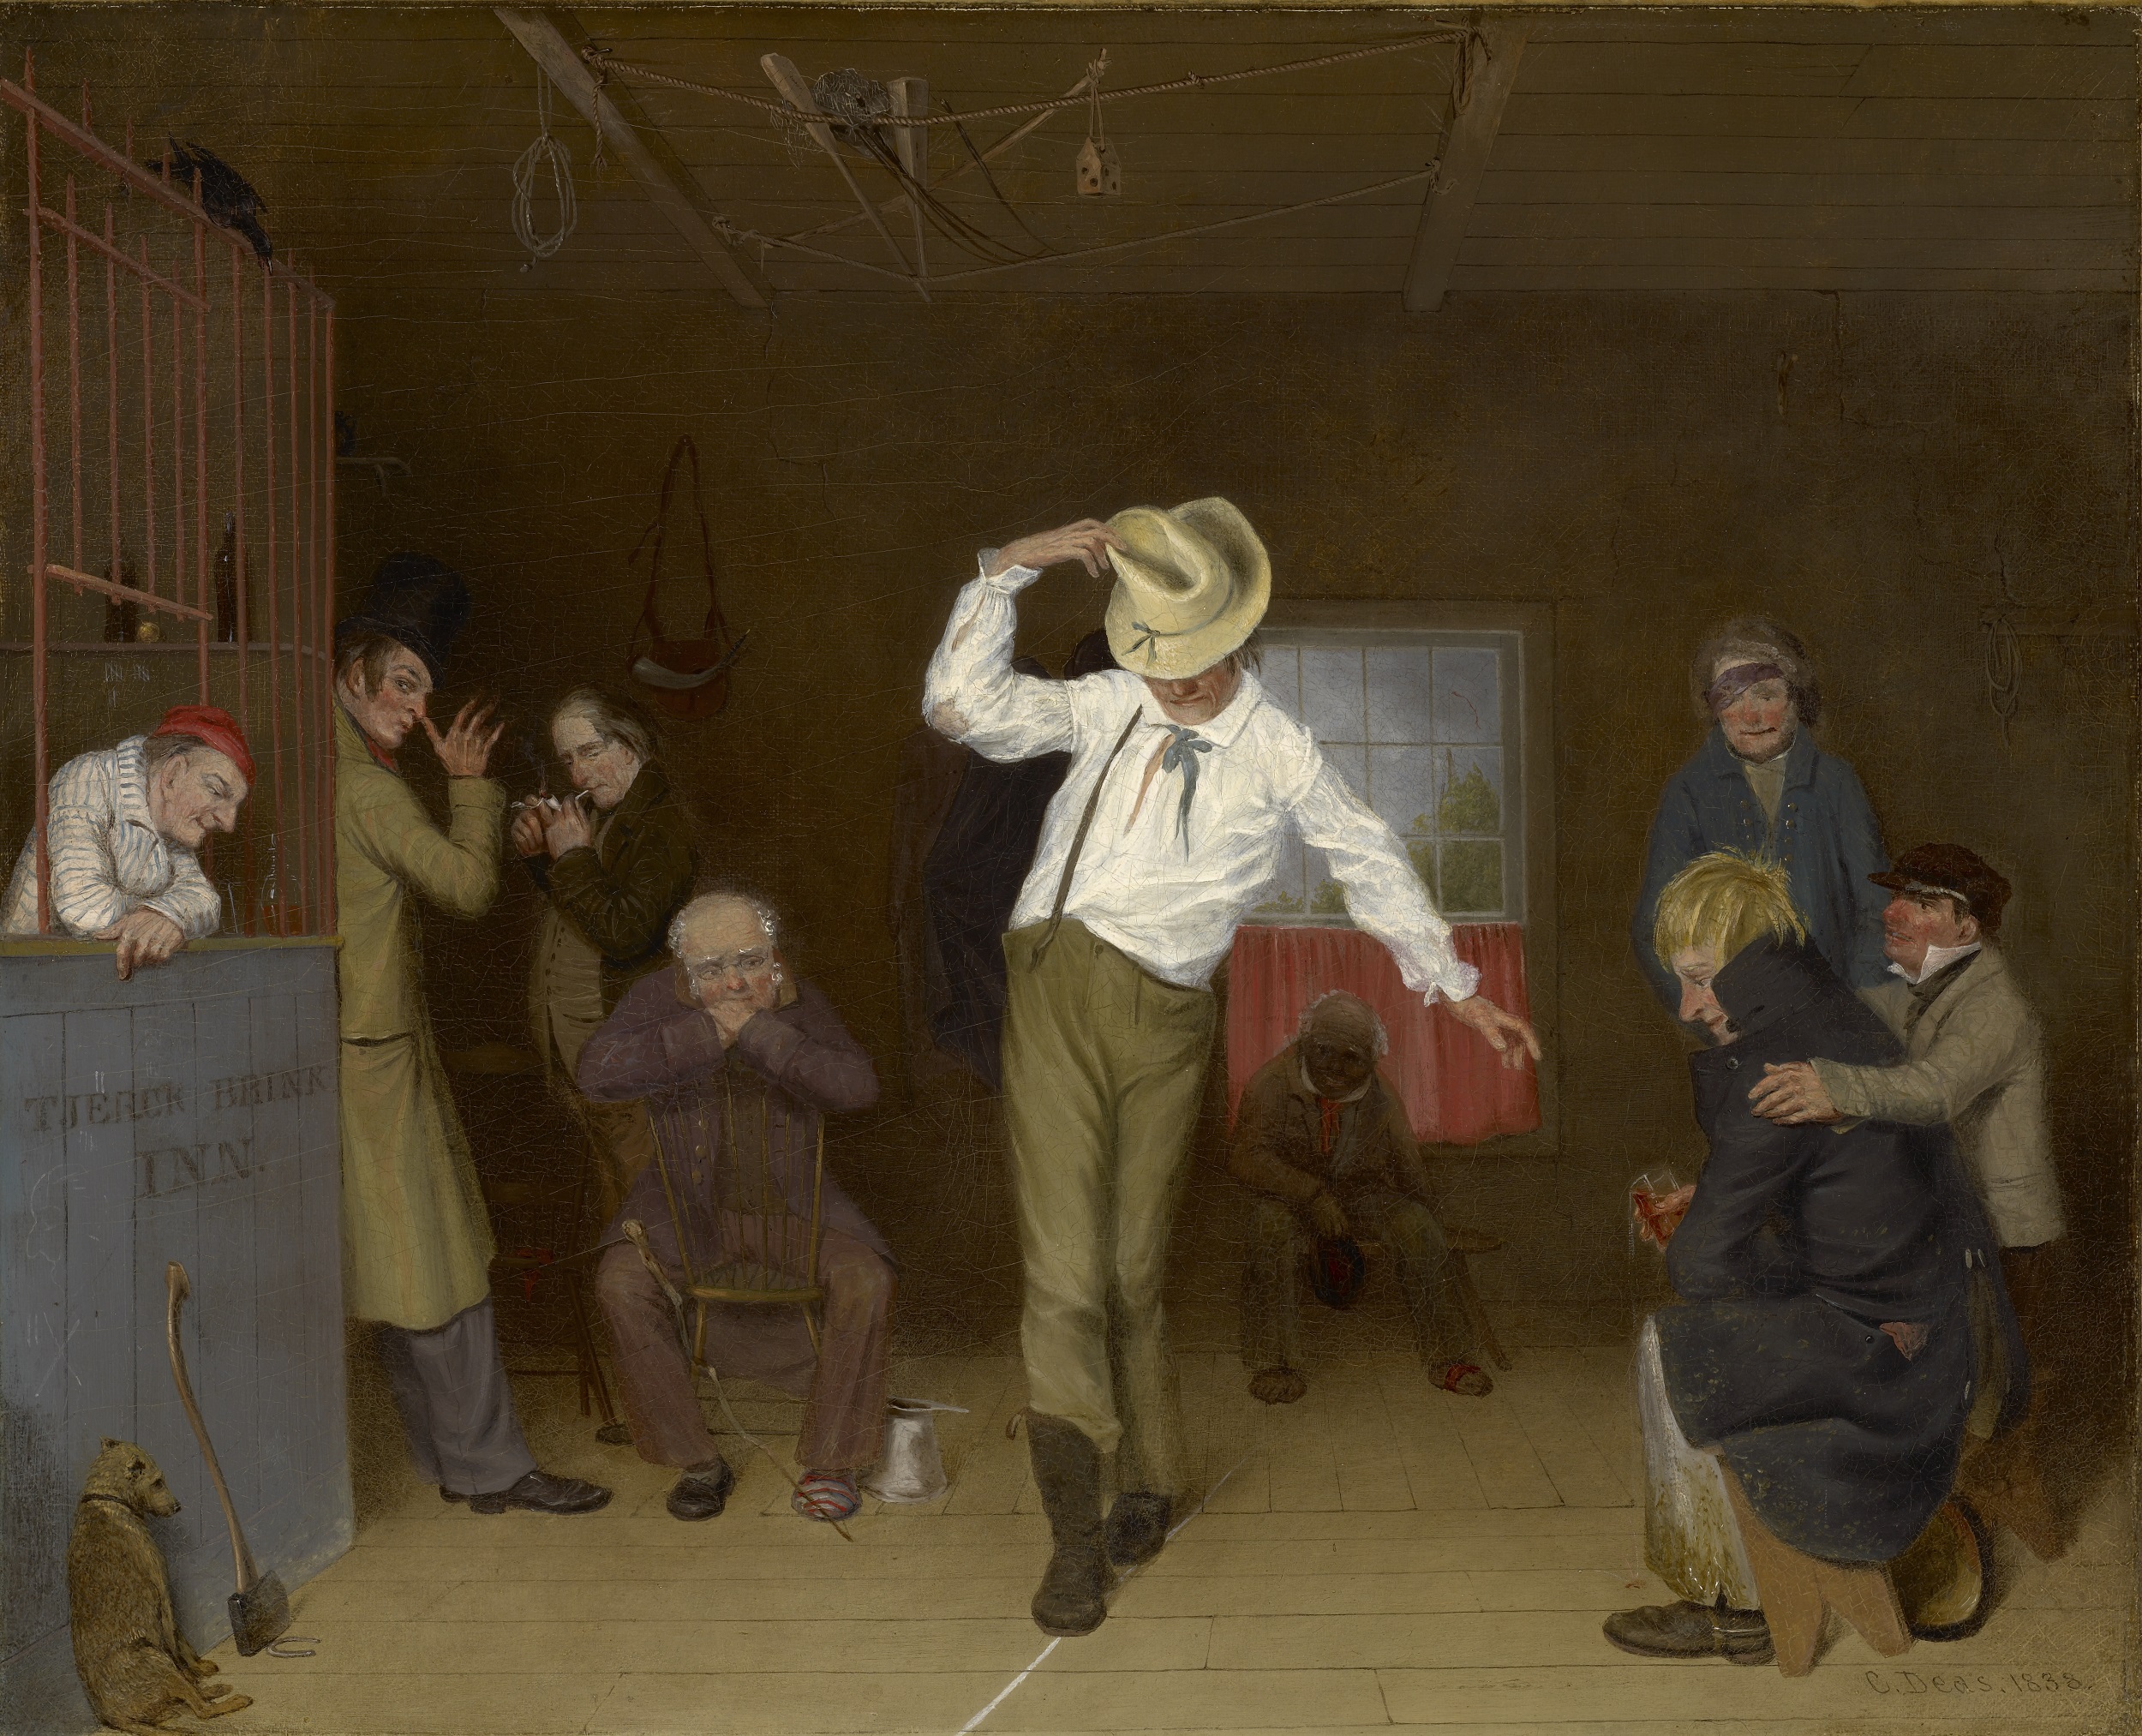 Oil painting of a man in a hat walking along a white line chalked onto a wooden floor, with other men watching.